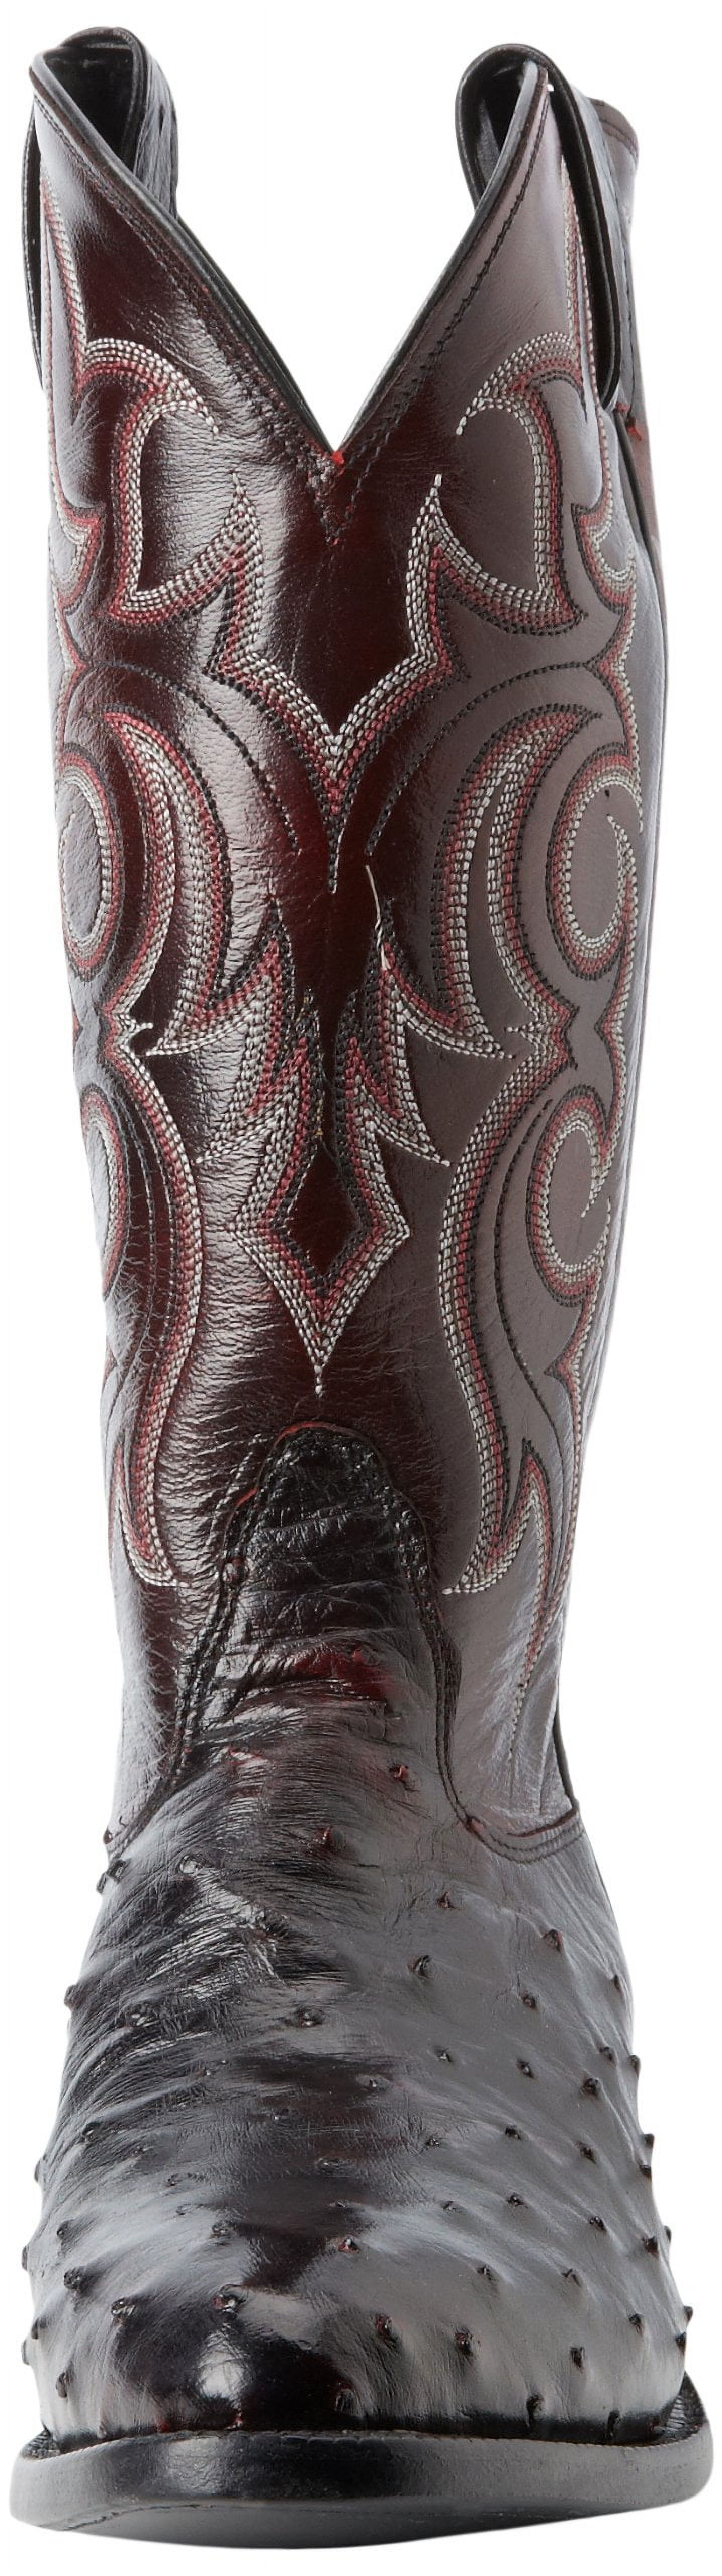 Nocona Boots Men's MD8506 Boot,Black Cherry Full Quill,6 EE US - image 5 of 6